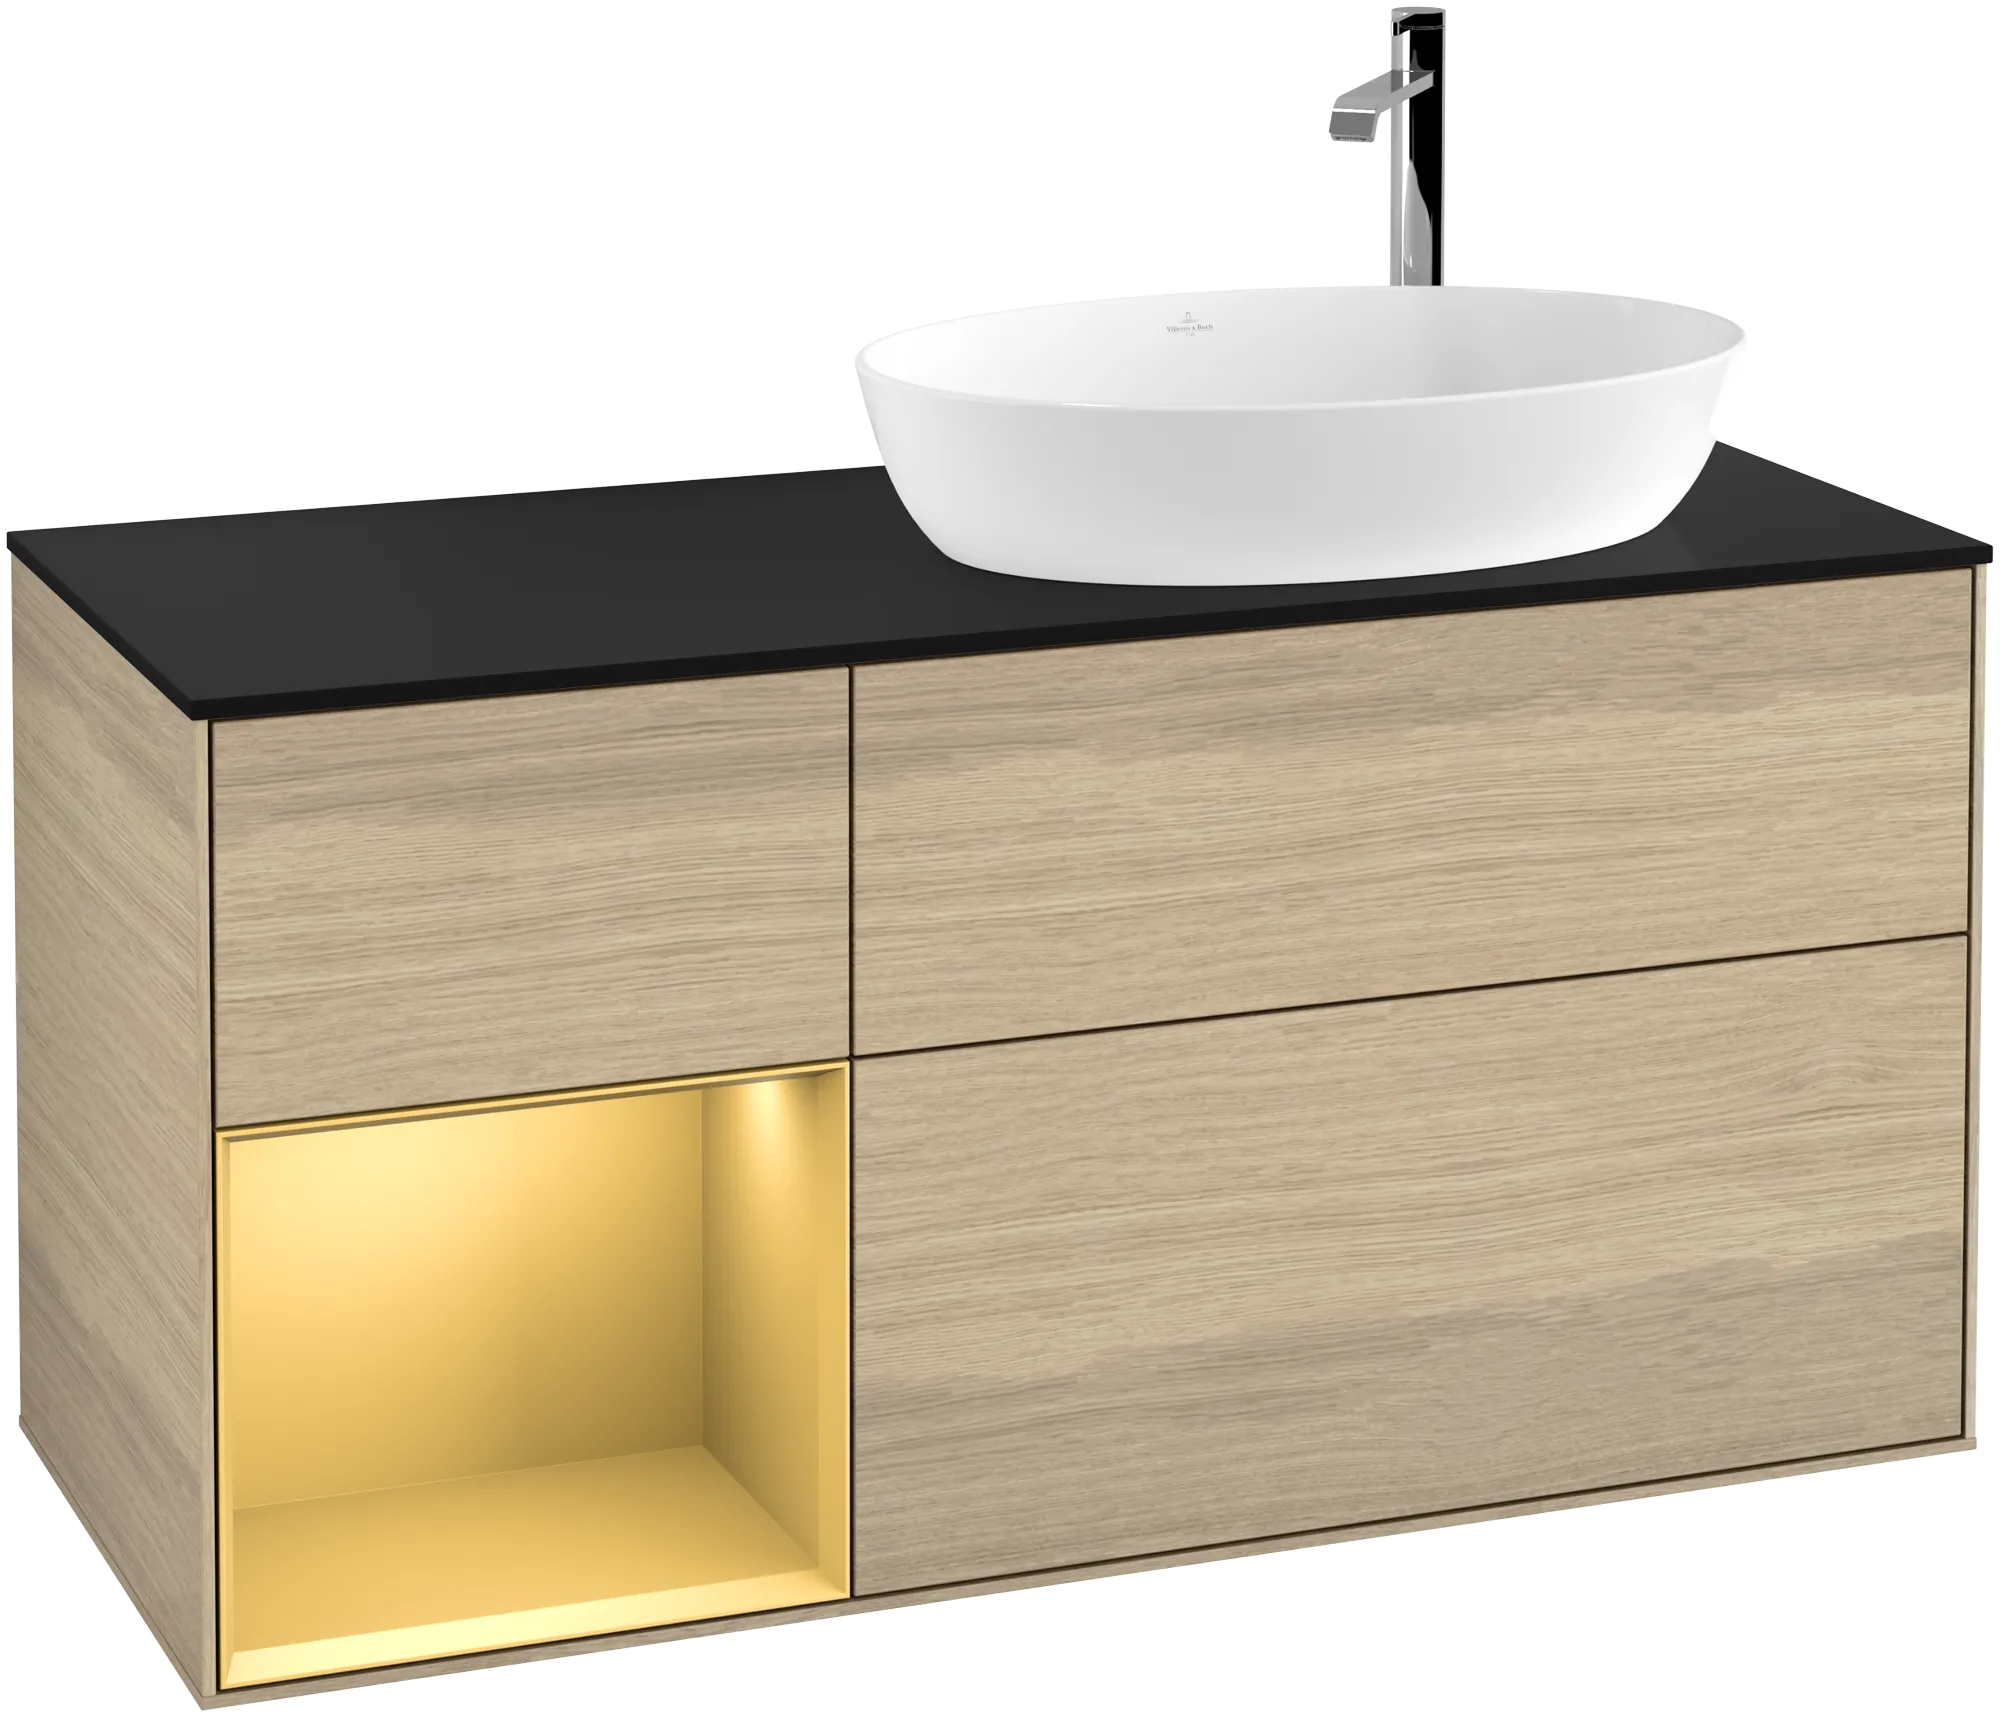 Picture of VILLEROY BOCH Finion Vanity unit, with lighting, 3 pull-out compartments, 1200 x 603 x 501 mm, Oak Veneer / Gold Matt Lacquer / Glass Black Matt #G922HFPC